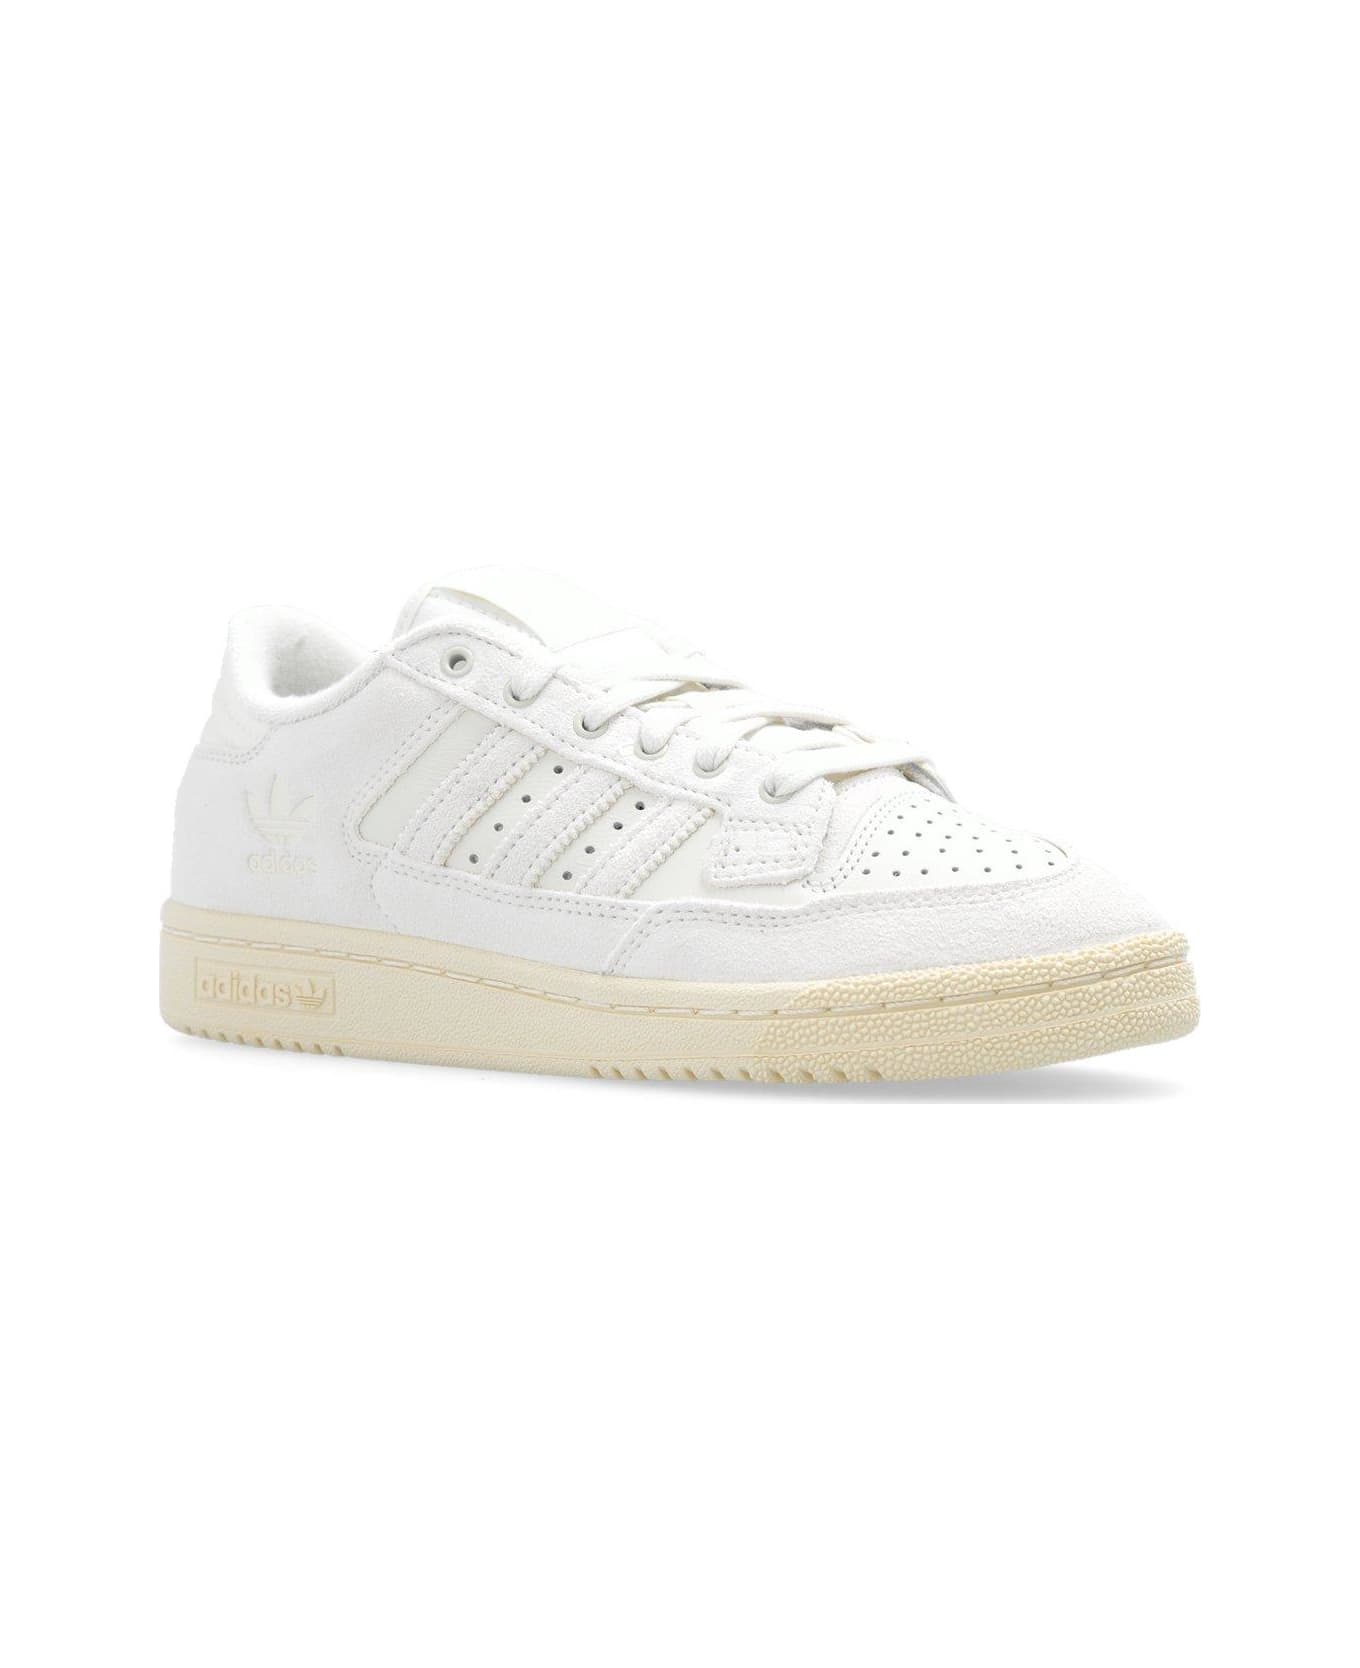 Adidas Originals Centennial 85 Lace-up Sneakers - White